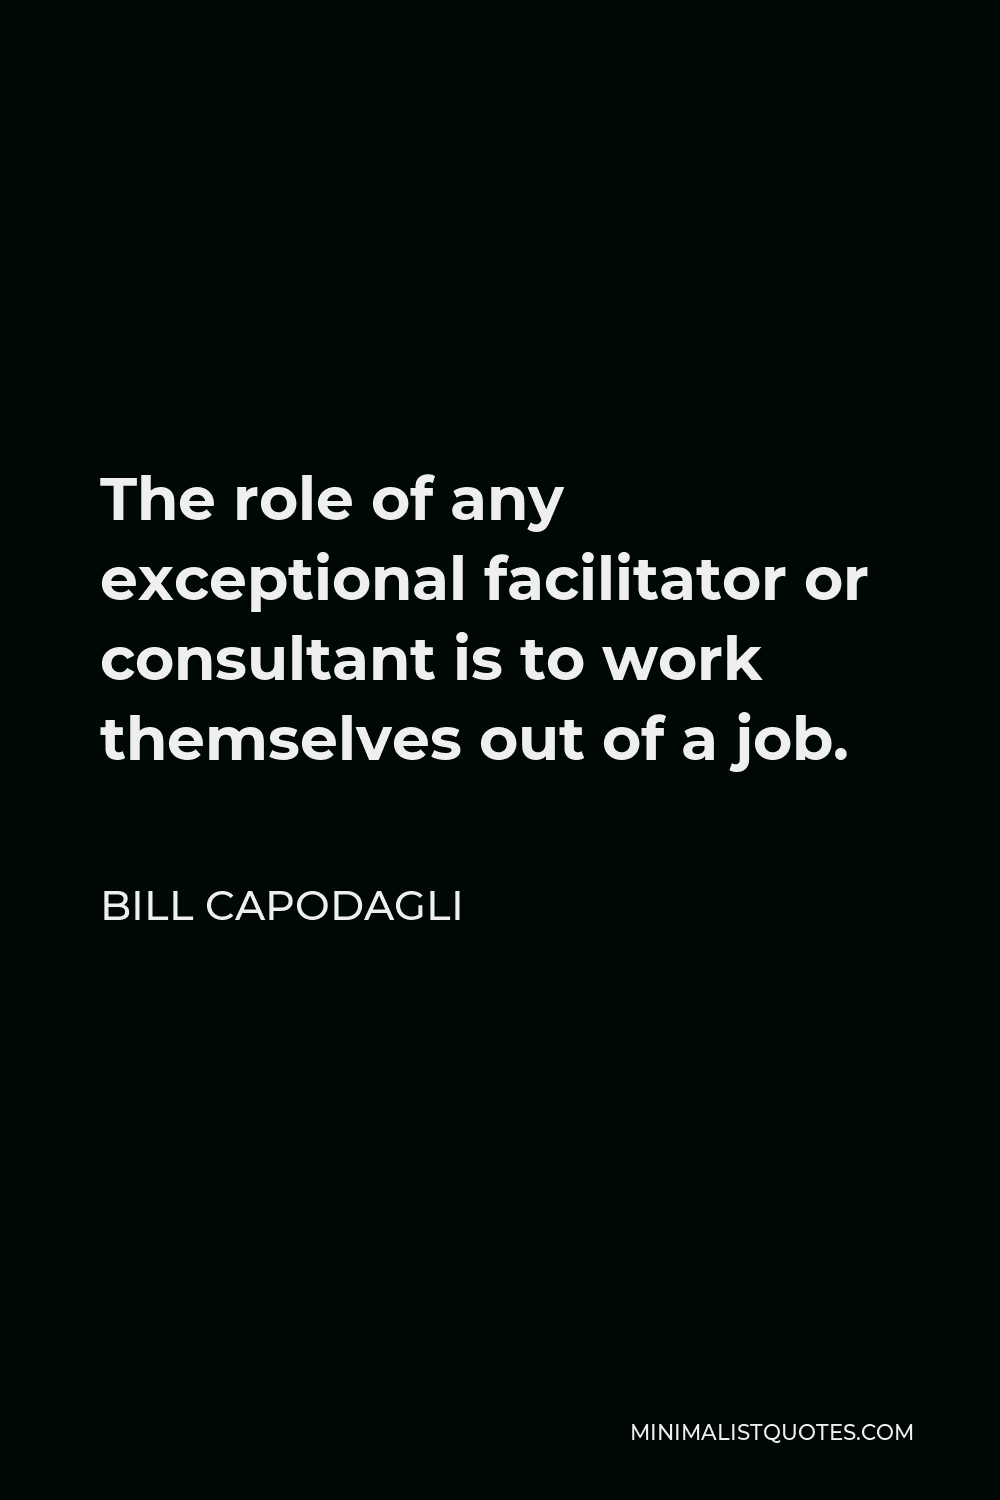 Bill Capodagli Quote - The role of any exceptional facilitator or consultant is to work themselves out of a job.